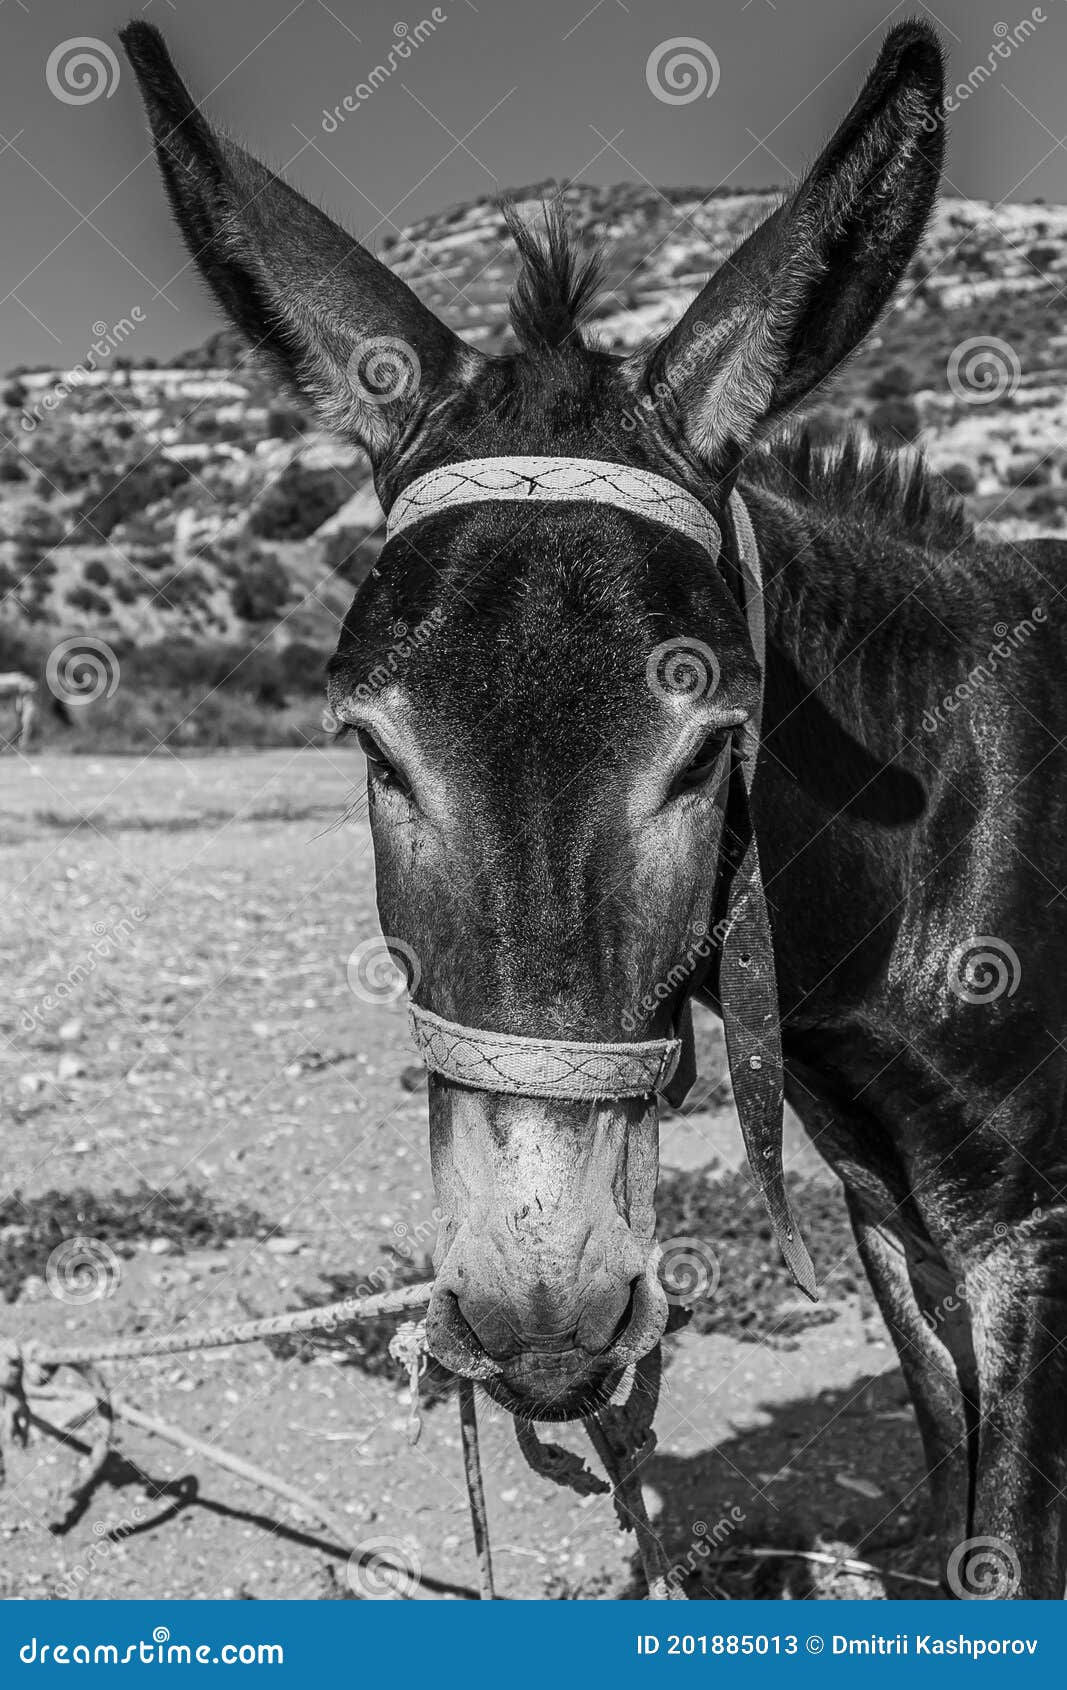 the donkey or ass equus africanus asinus is a domesticated member of the horse family, equidae. the wild ancestor of the donkey